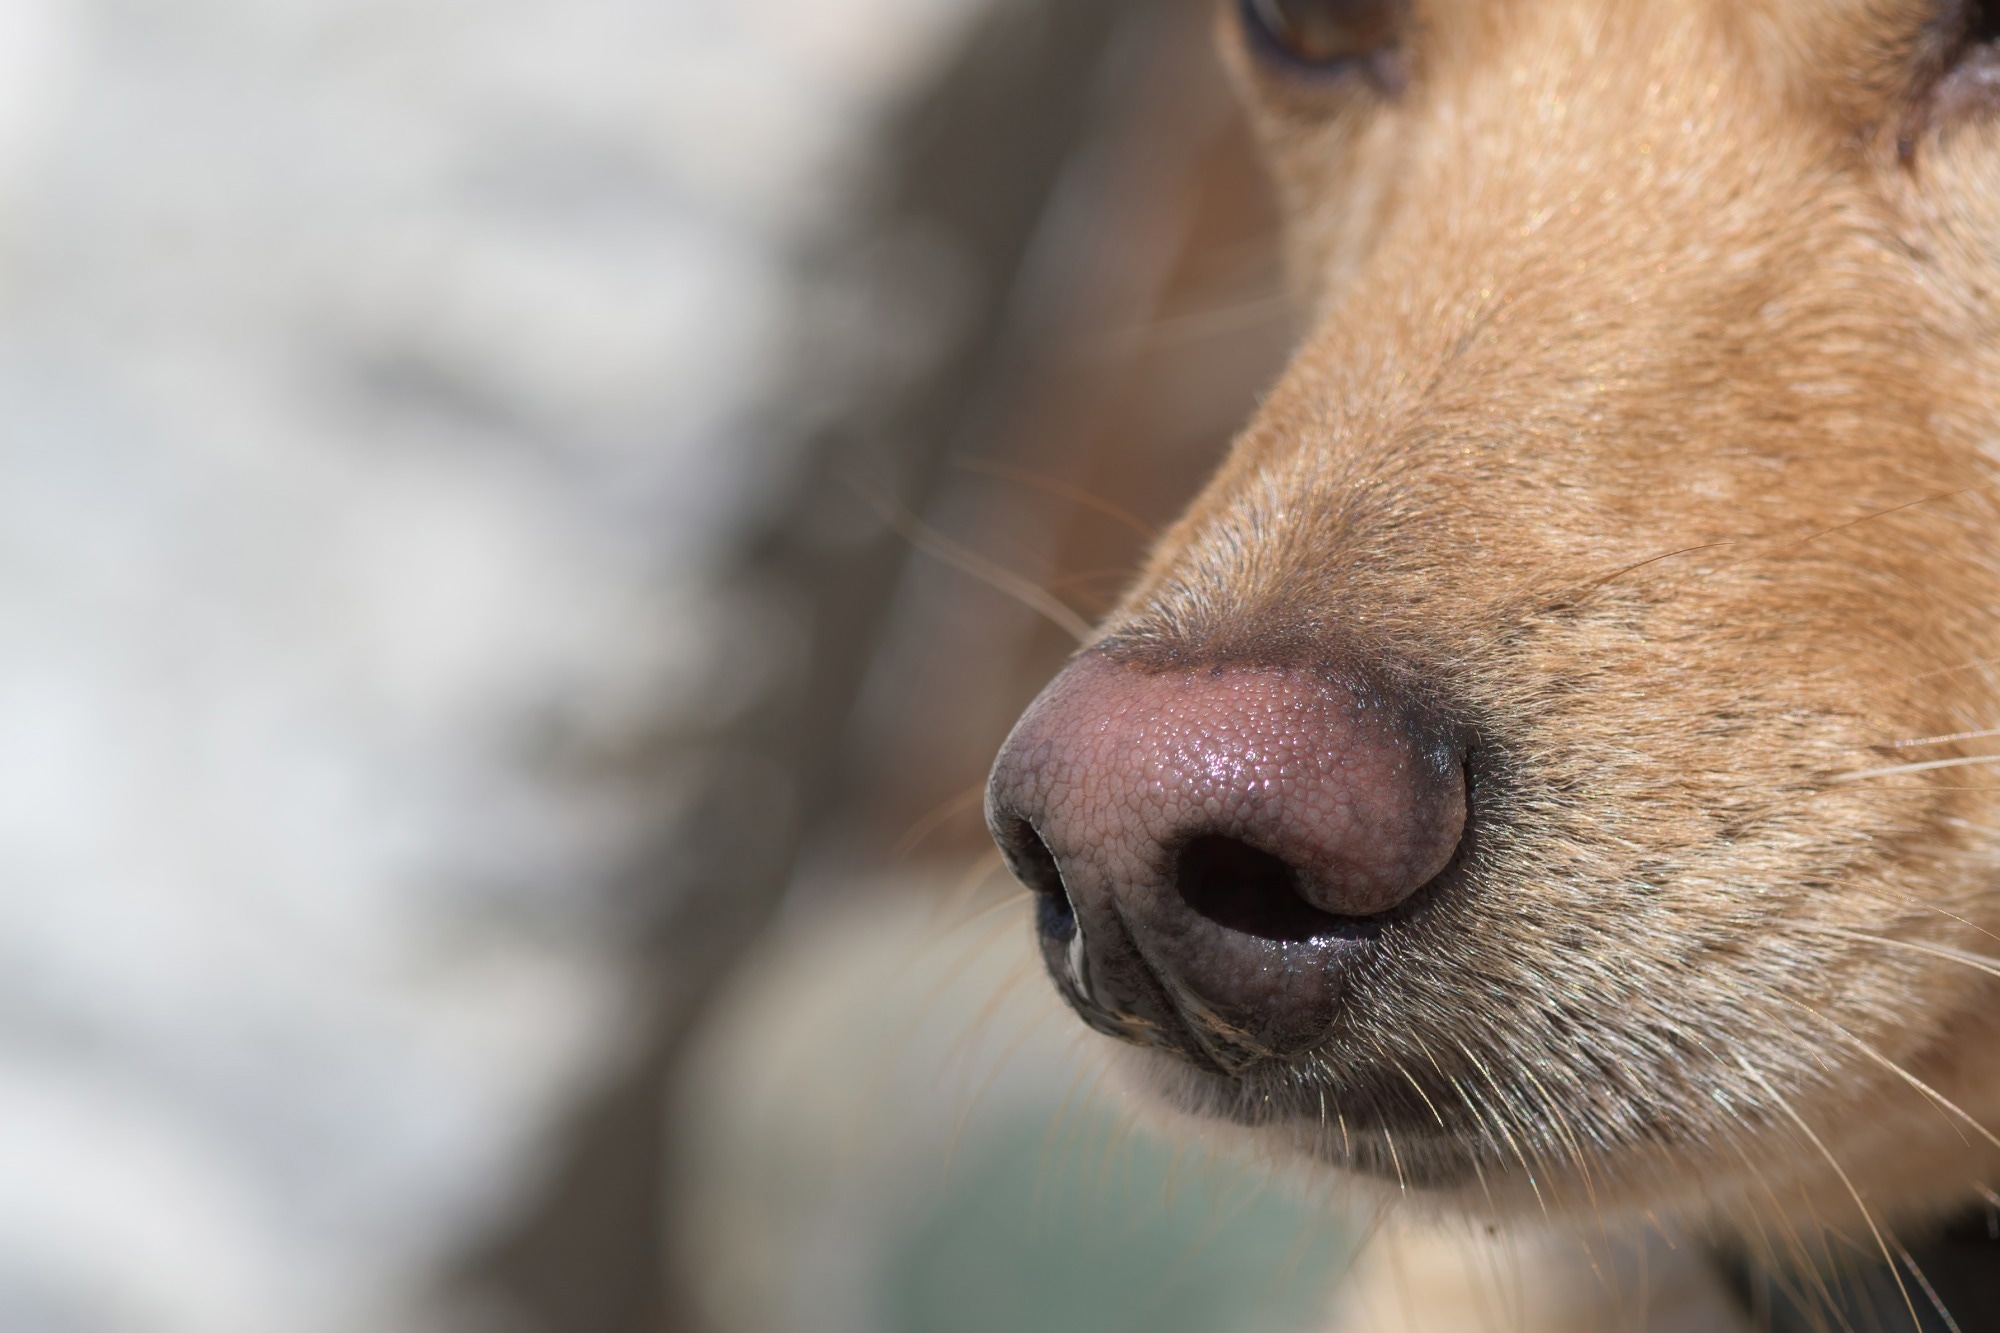 Study: Lessons Learned From a COVID-19 Dog Screening Pilot in California K-12 Schools. Image Credit: obertAvgustin/Shutterstock.com